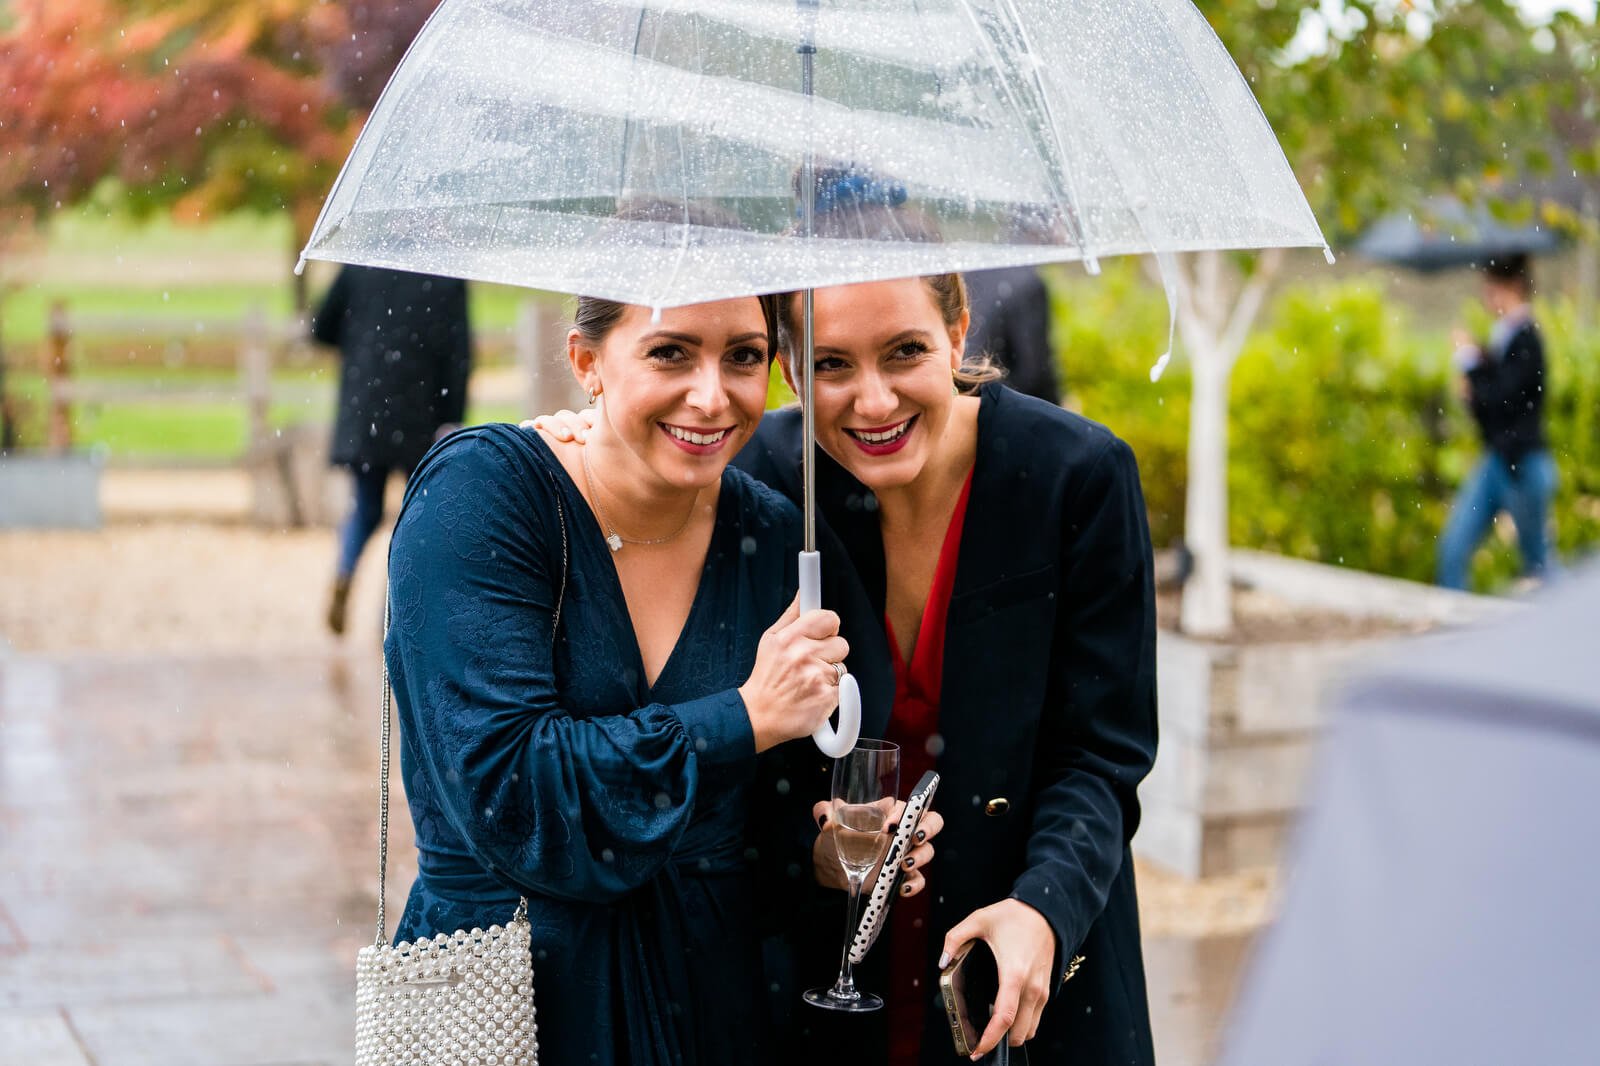 candid wedding photo in the rain at silchester farm